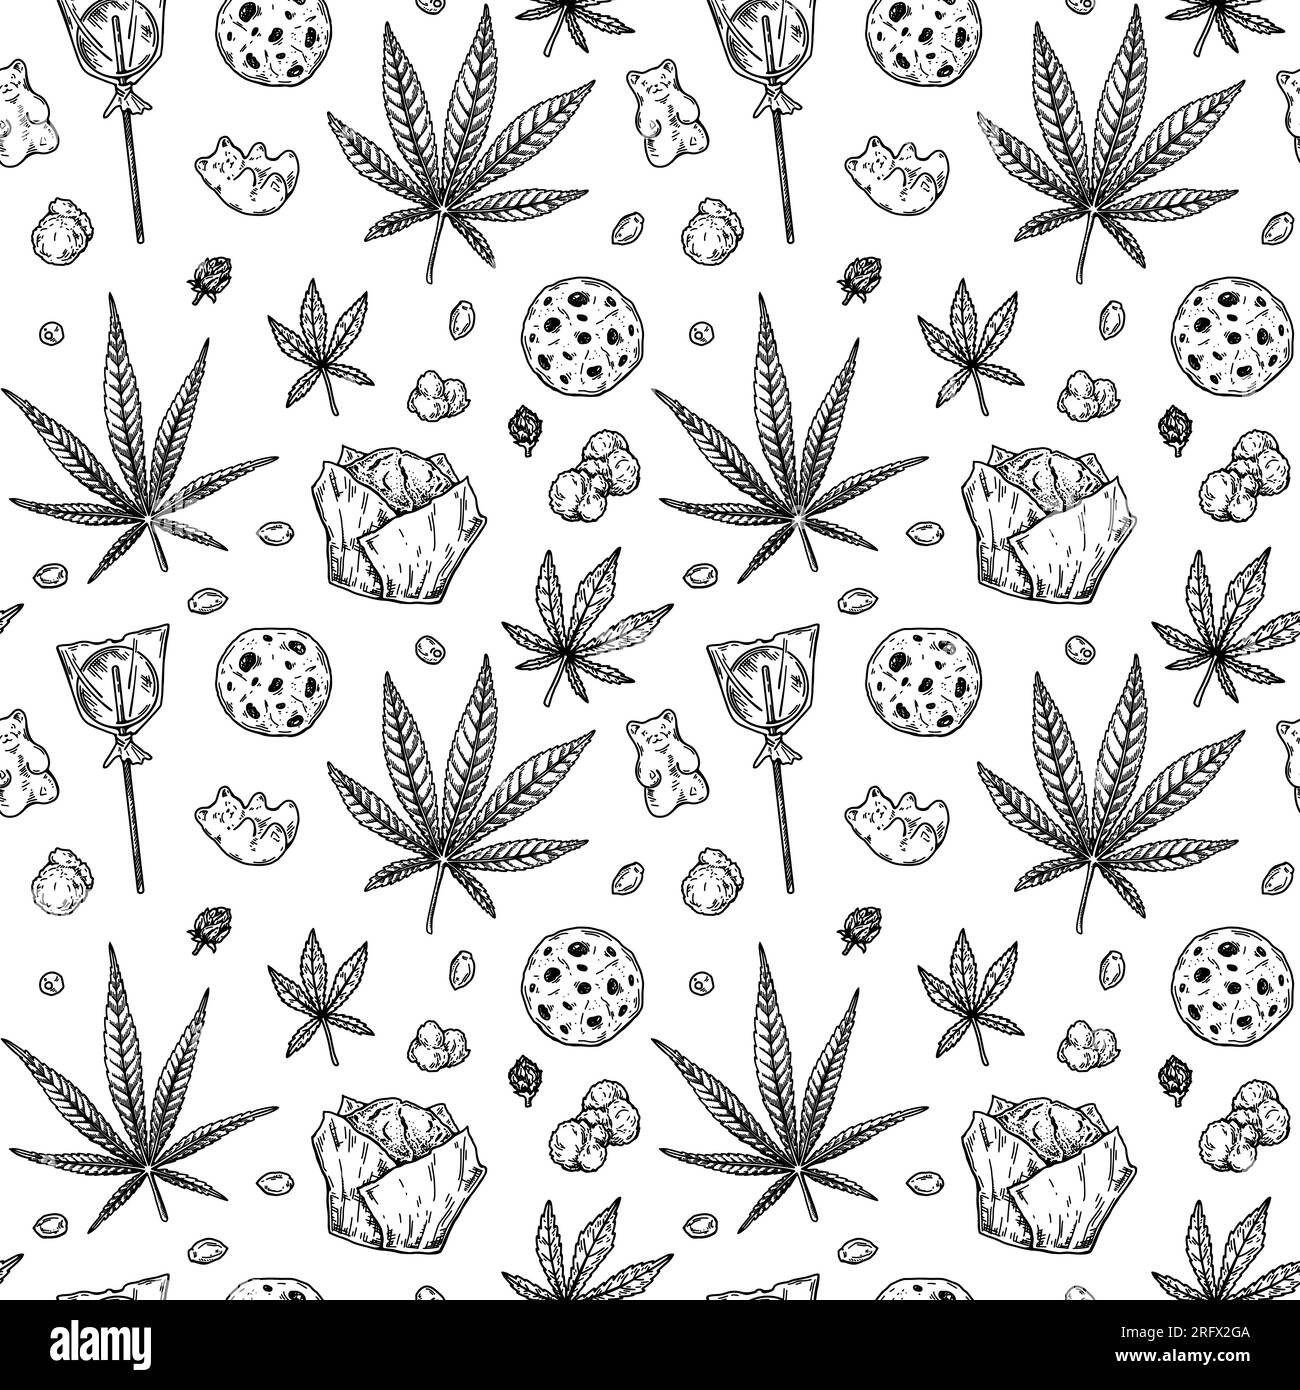 Cannabis products seamless pattern. Marijuana hand drawn vintage background. Vector illustration in sketch style. Weed engraving design Stock Vector